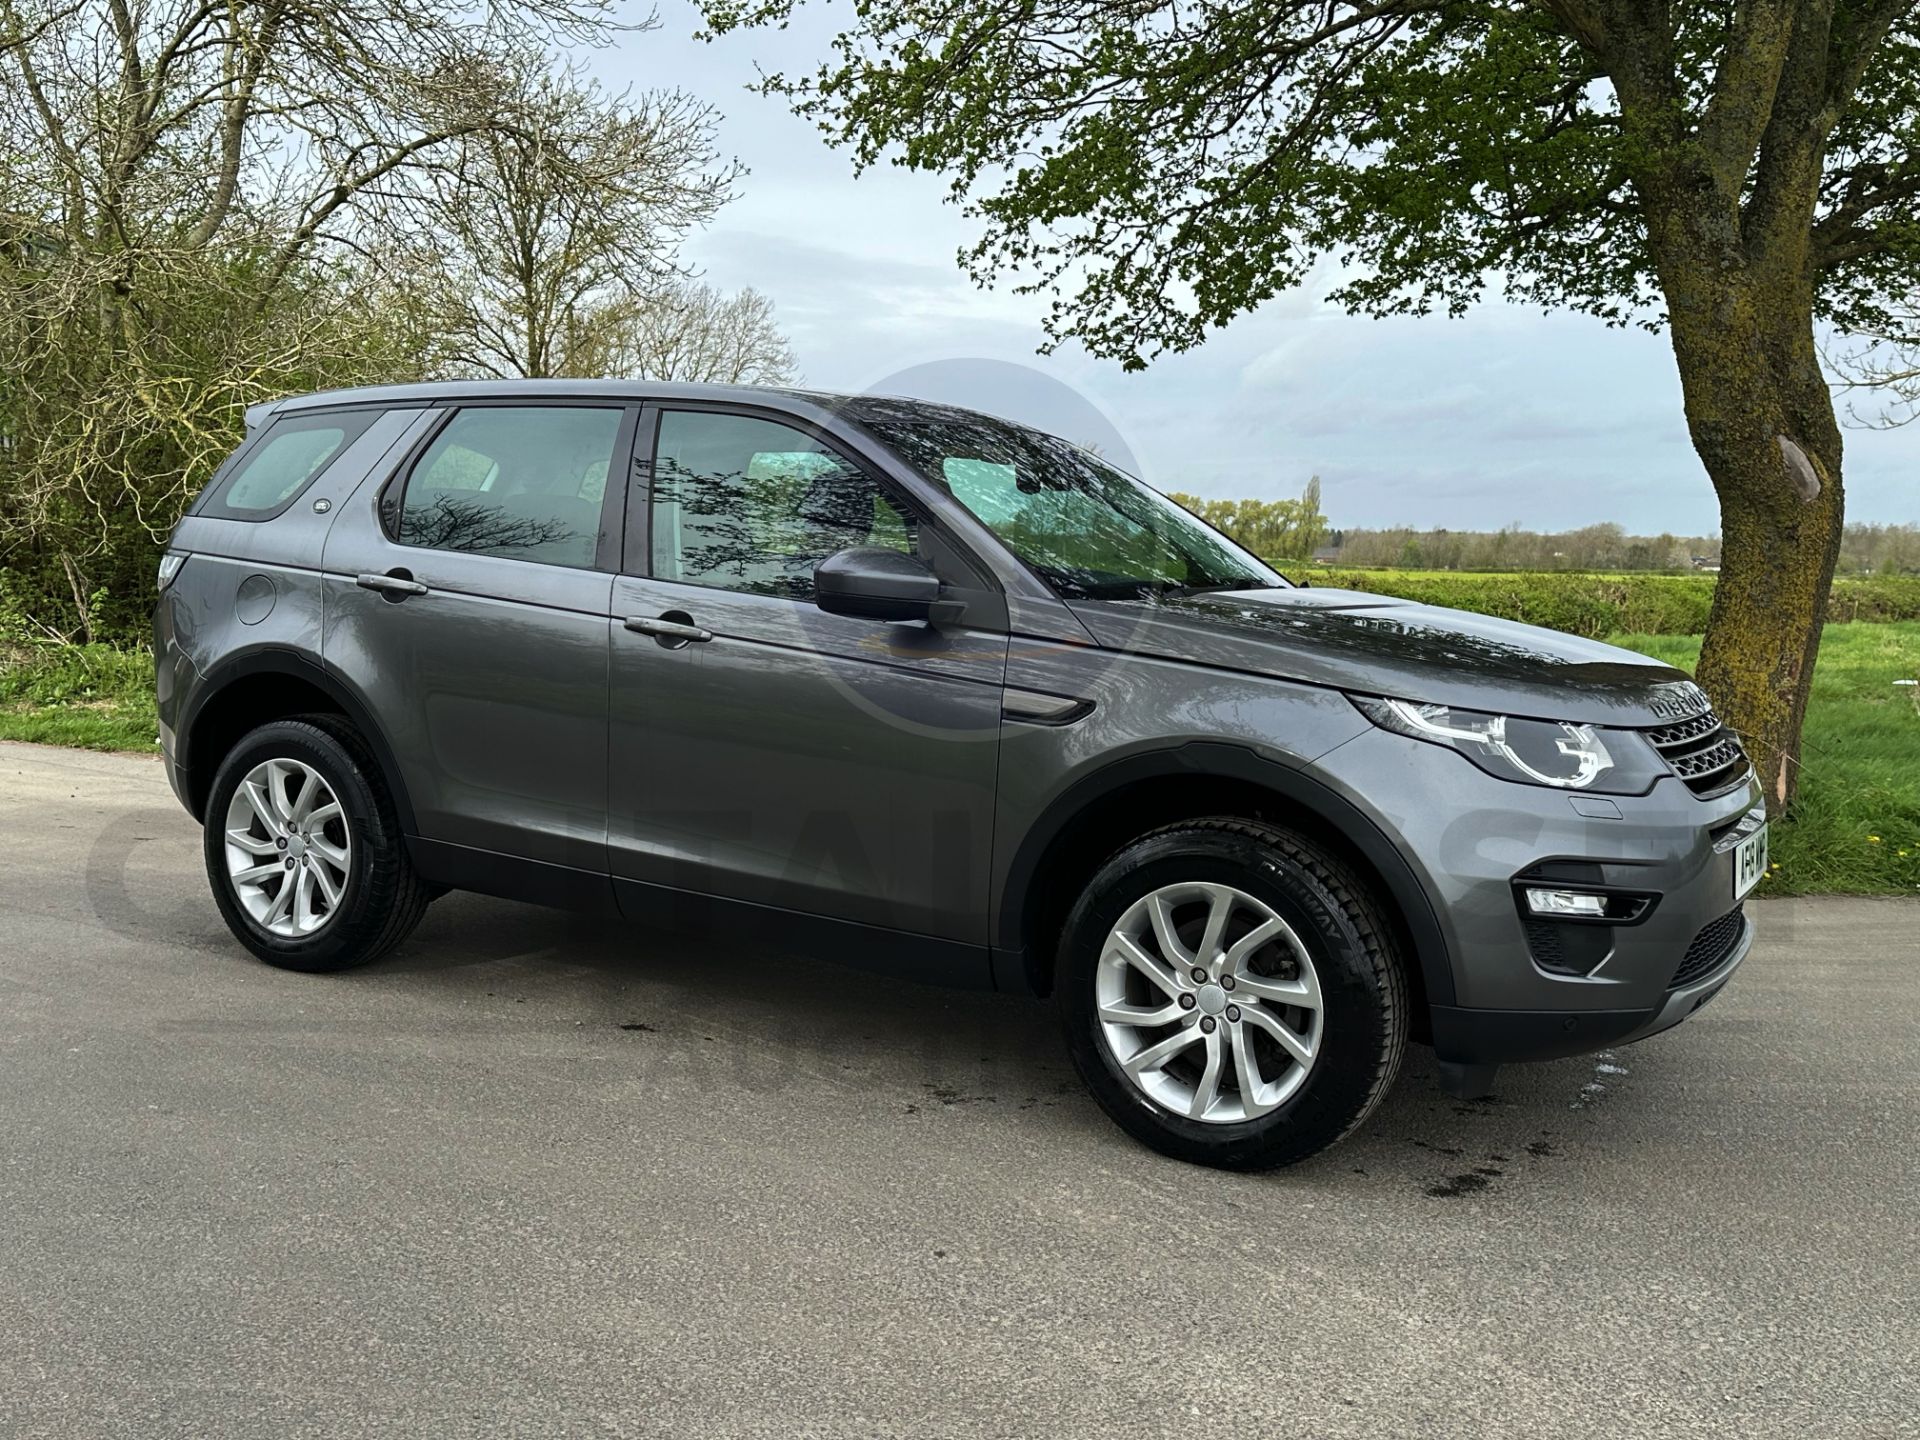 (On Sale) LAND ROVER DISCOVERY SPORT *SE TECH* 5 DOOR SUV (2018 - EURO 6) 2.0 TD4 - AUTO *HUGE SPEC* - Image 2 of 51